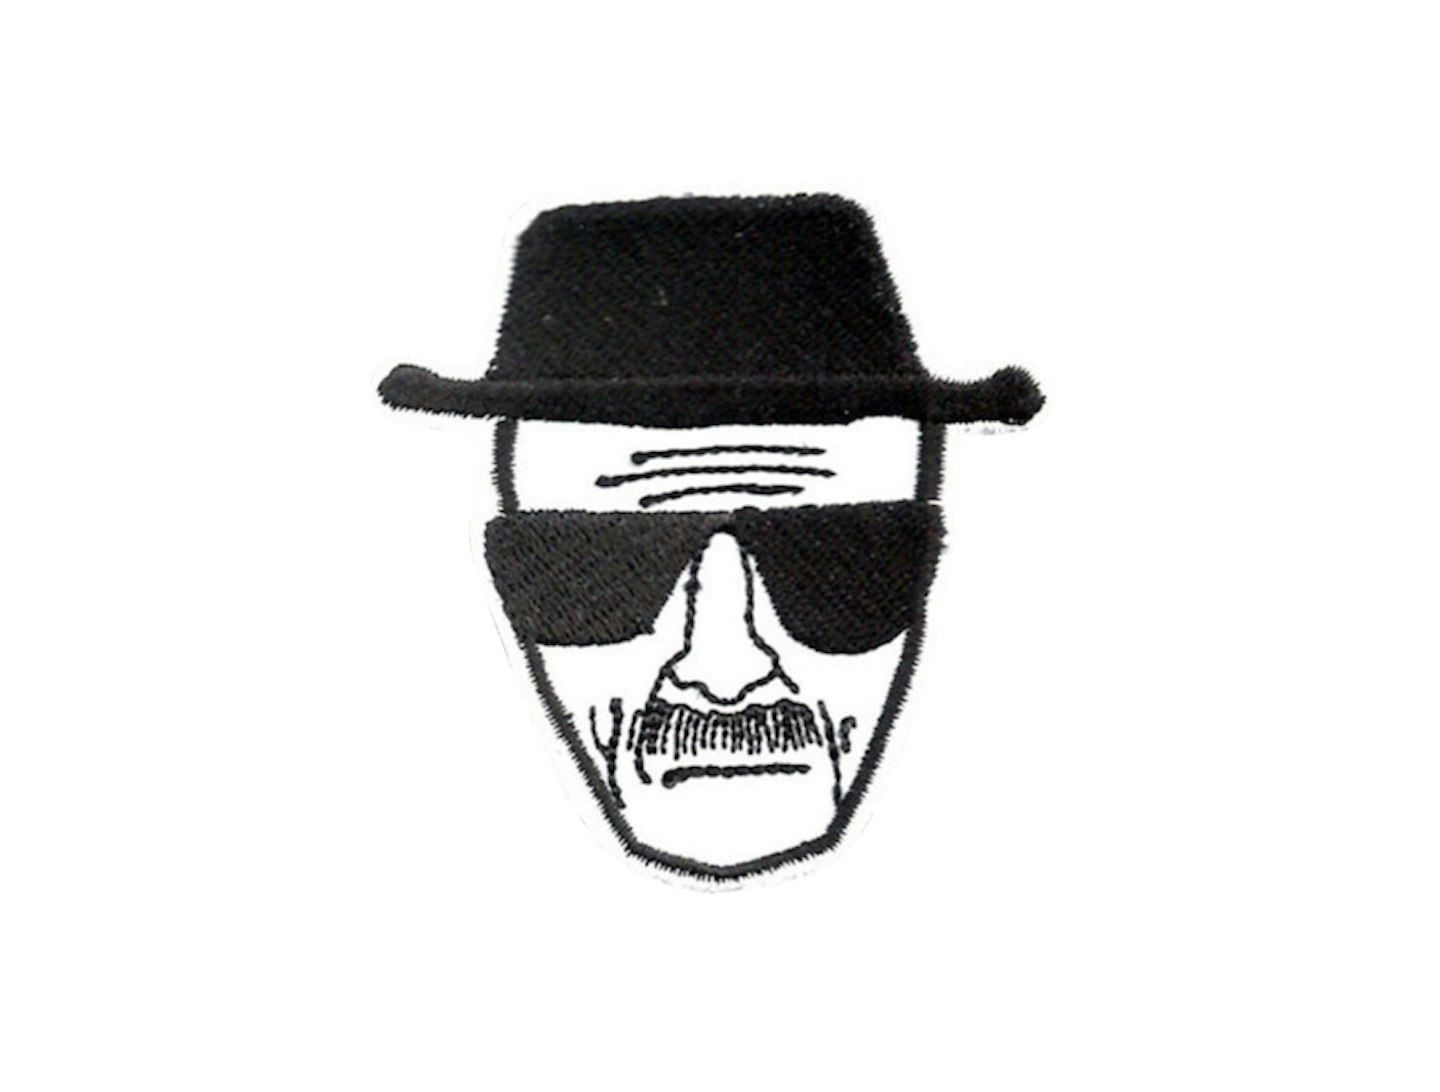 Breaking Bad Black and White Embroidered Badge, £5.95